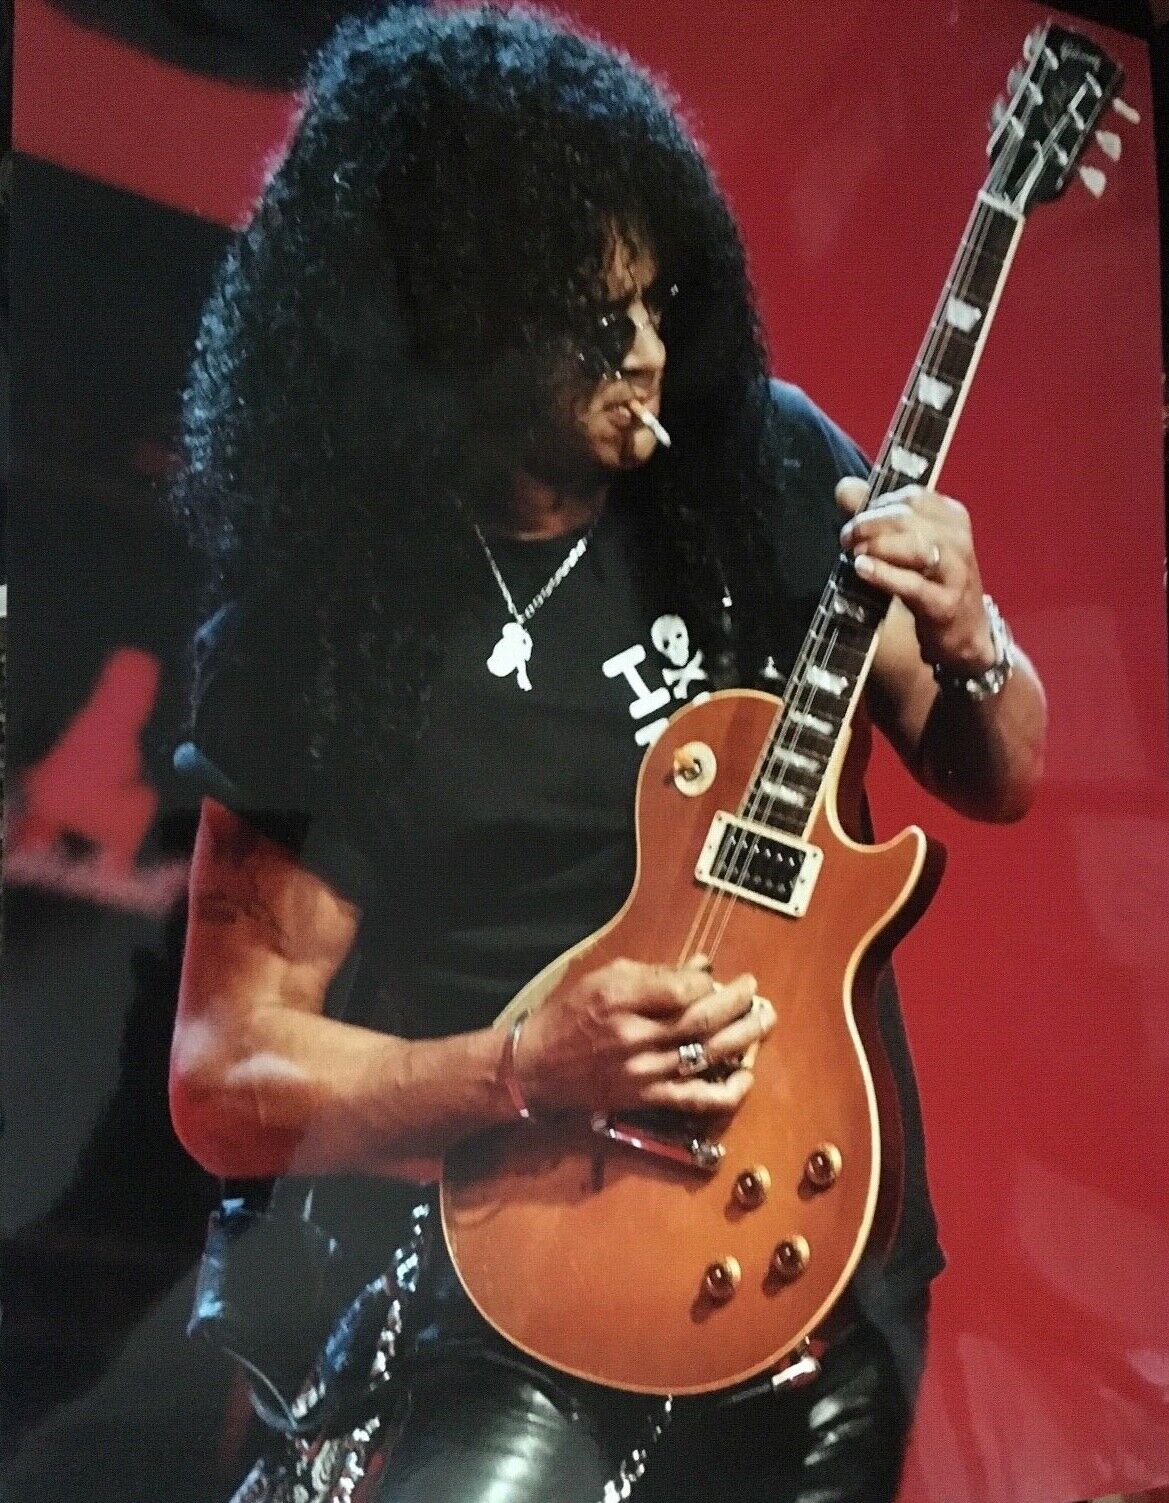 SLASH - GUNS N ROSES GUITARIST - EXTRA LARGE UNSIGNED Photo Poster painting